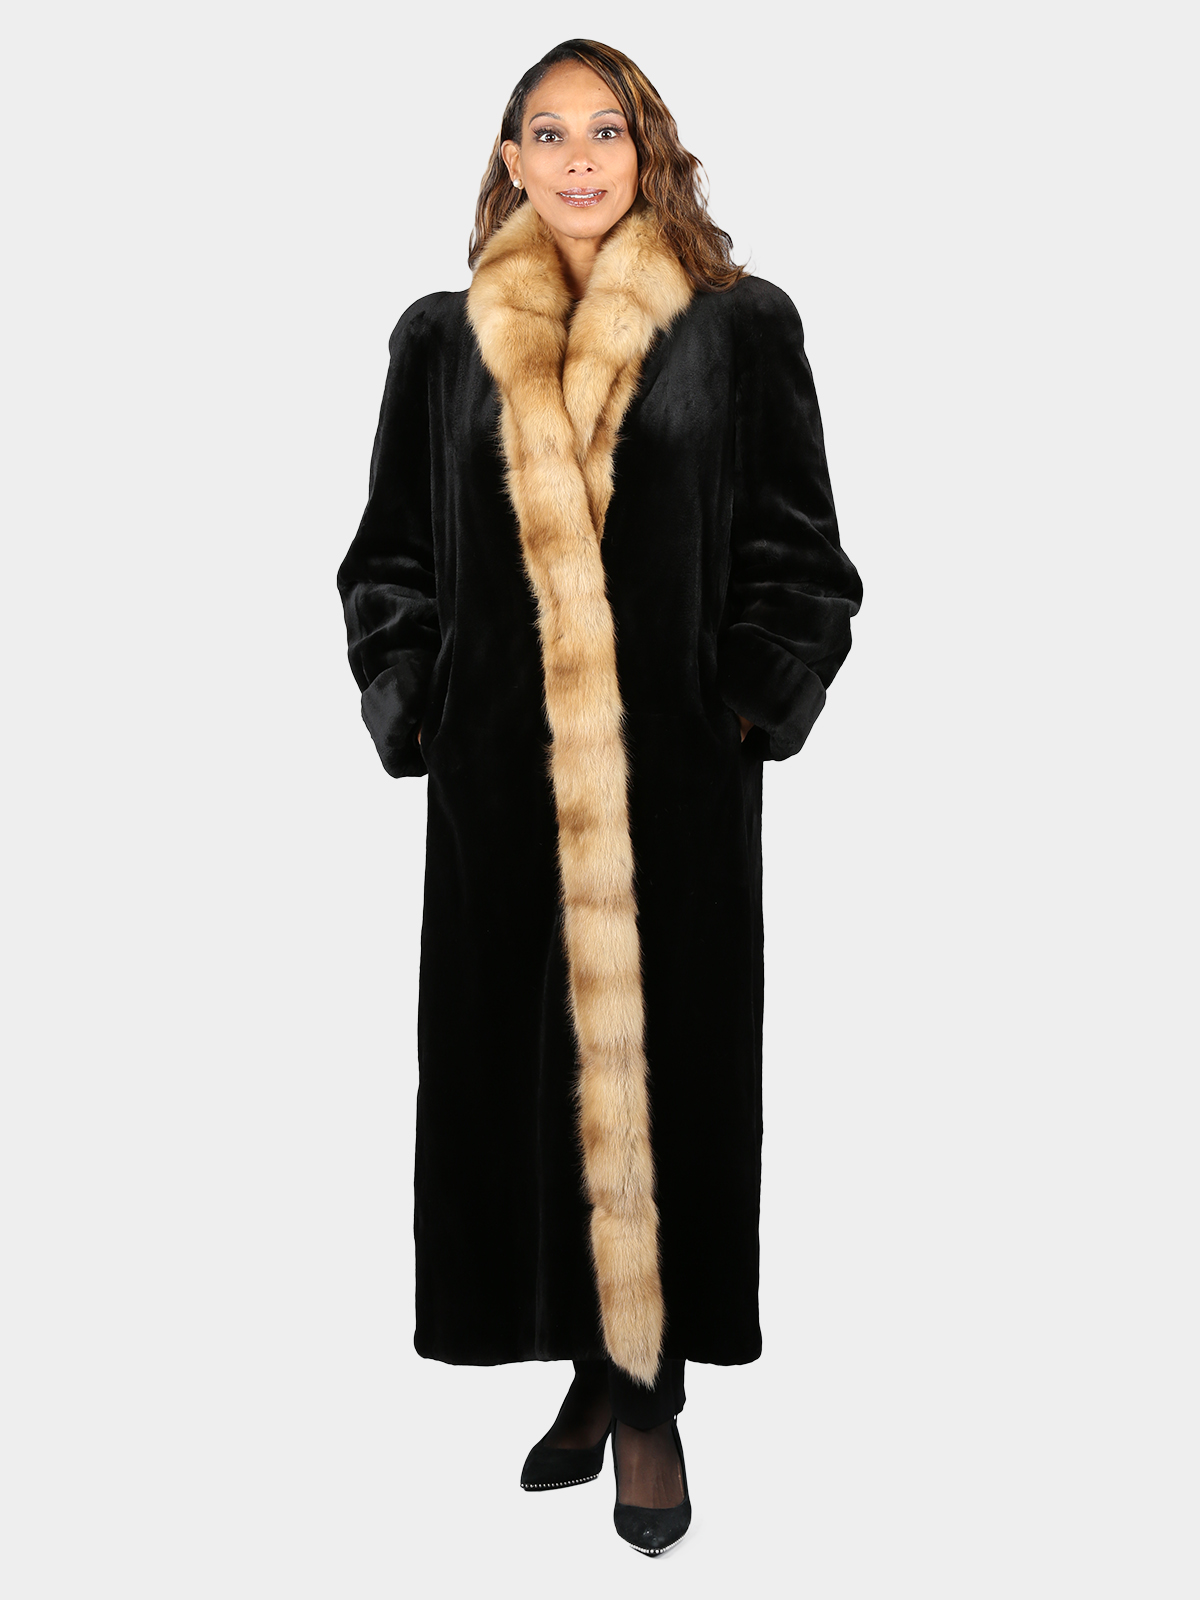 Woman's Black Sheared Mink Fur Coat with Cross Cut Golden Sable Collar and Tuxedo Front